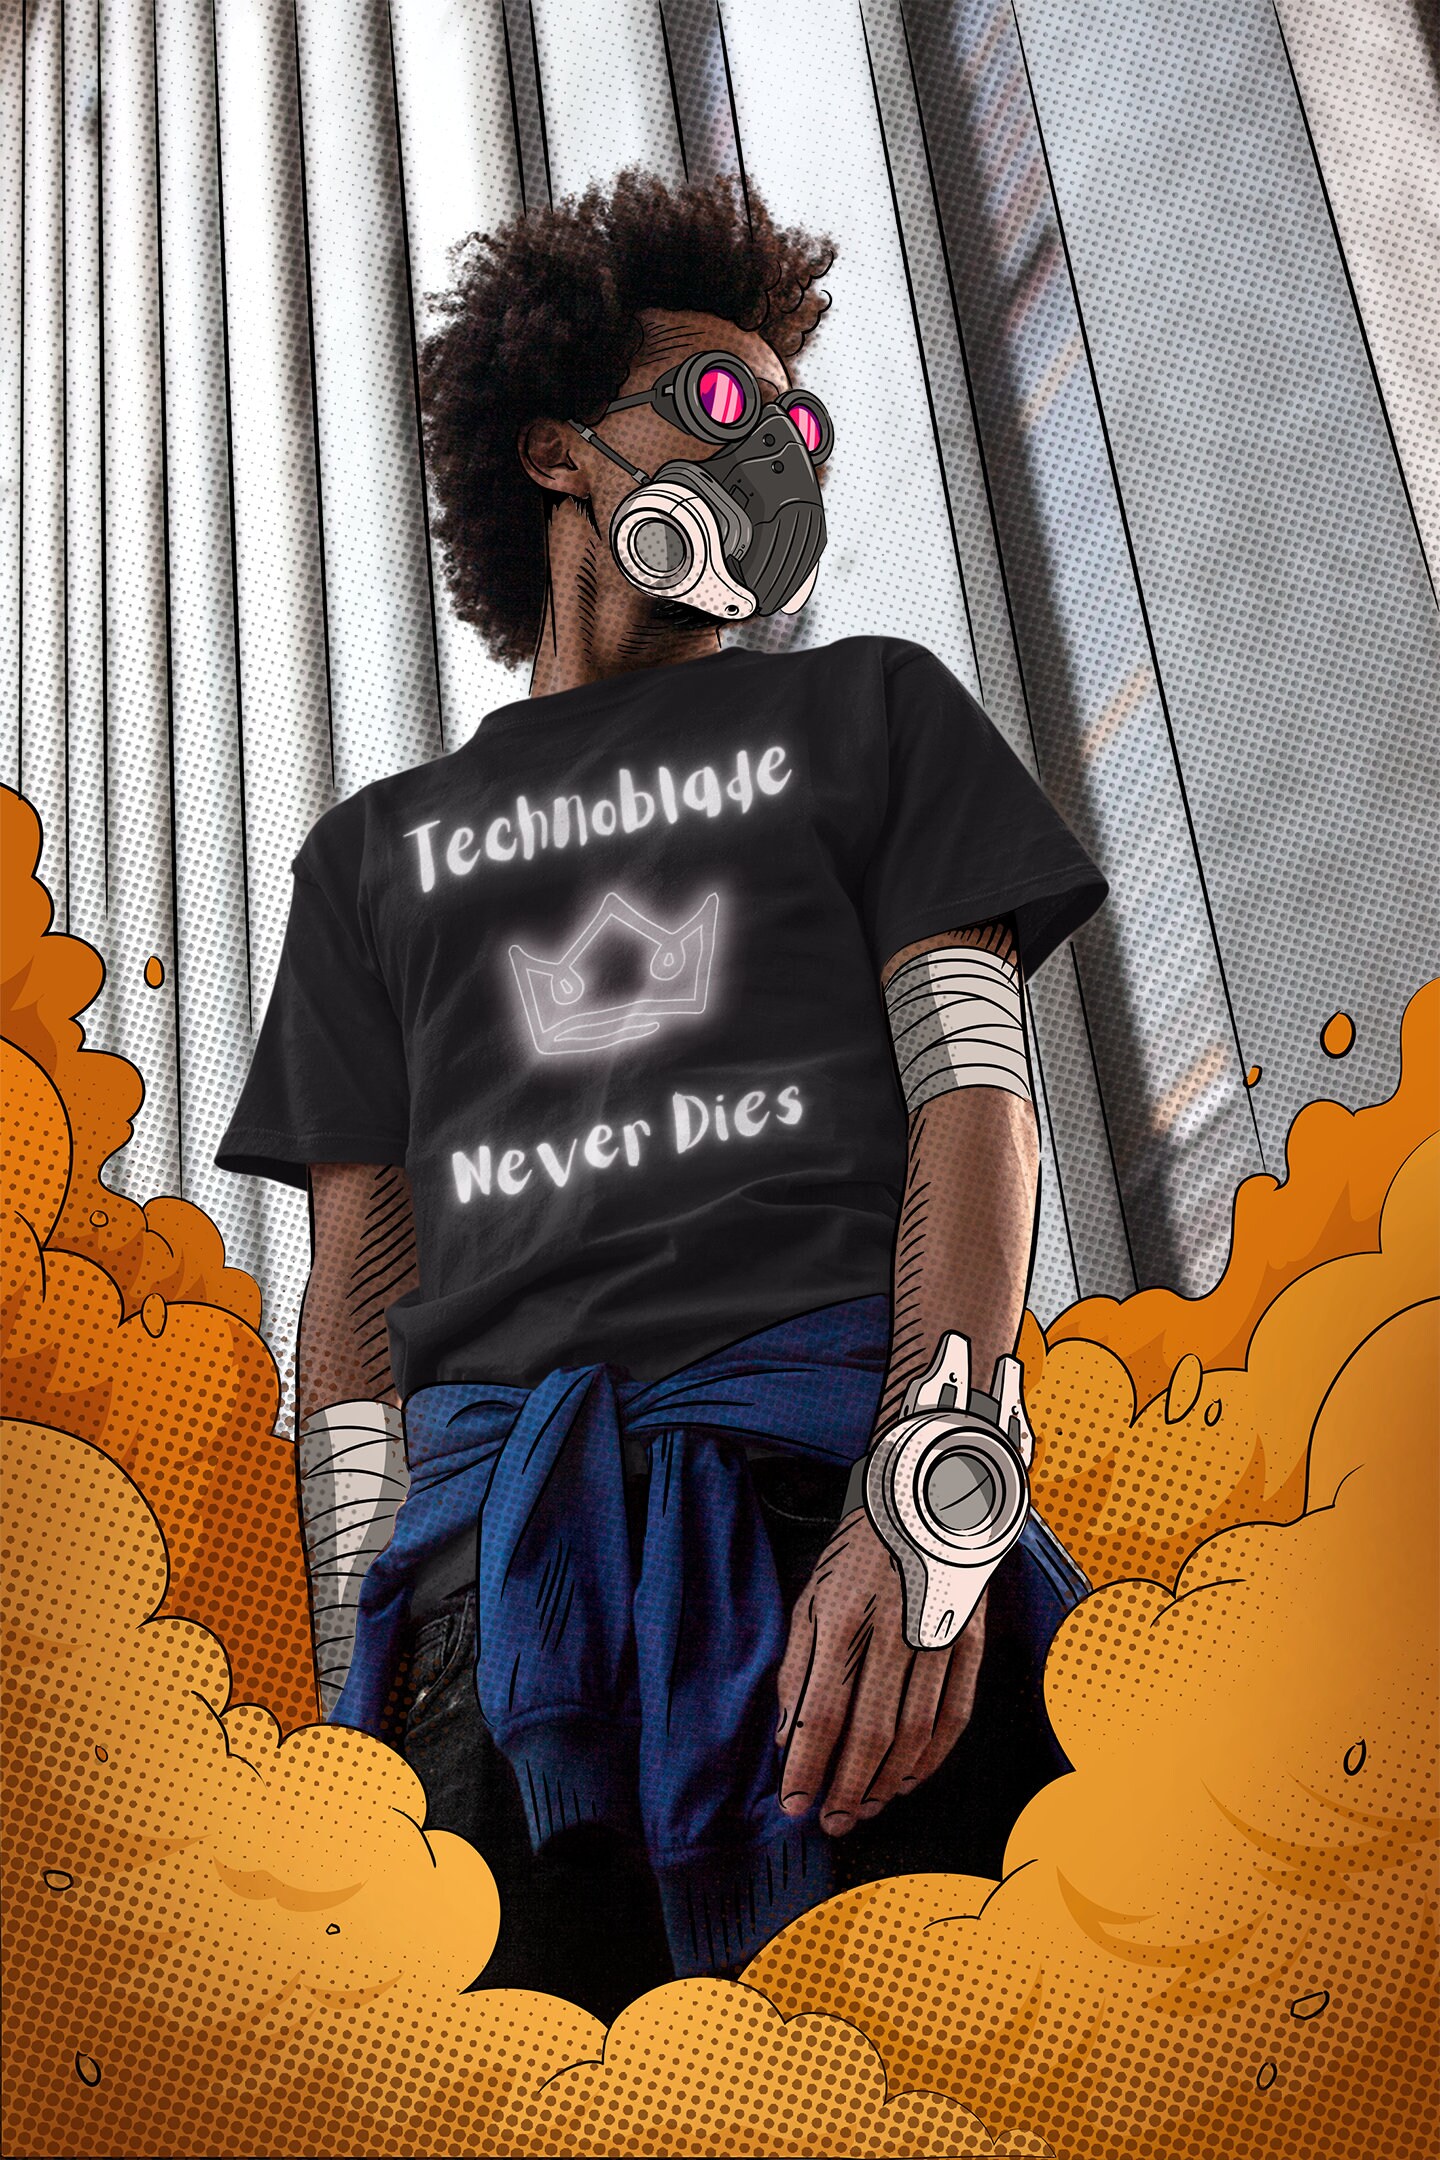 Technoblade Never Dies technoblade Png Technoblade rs